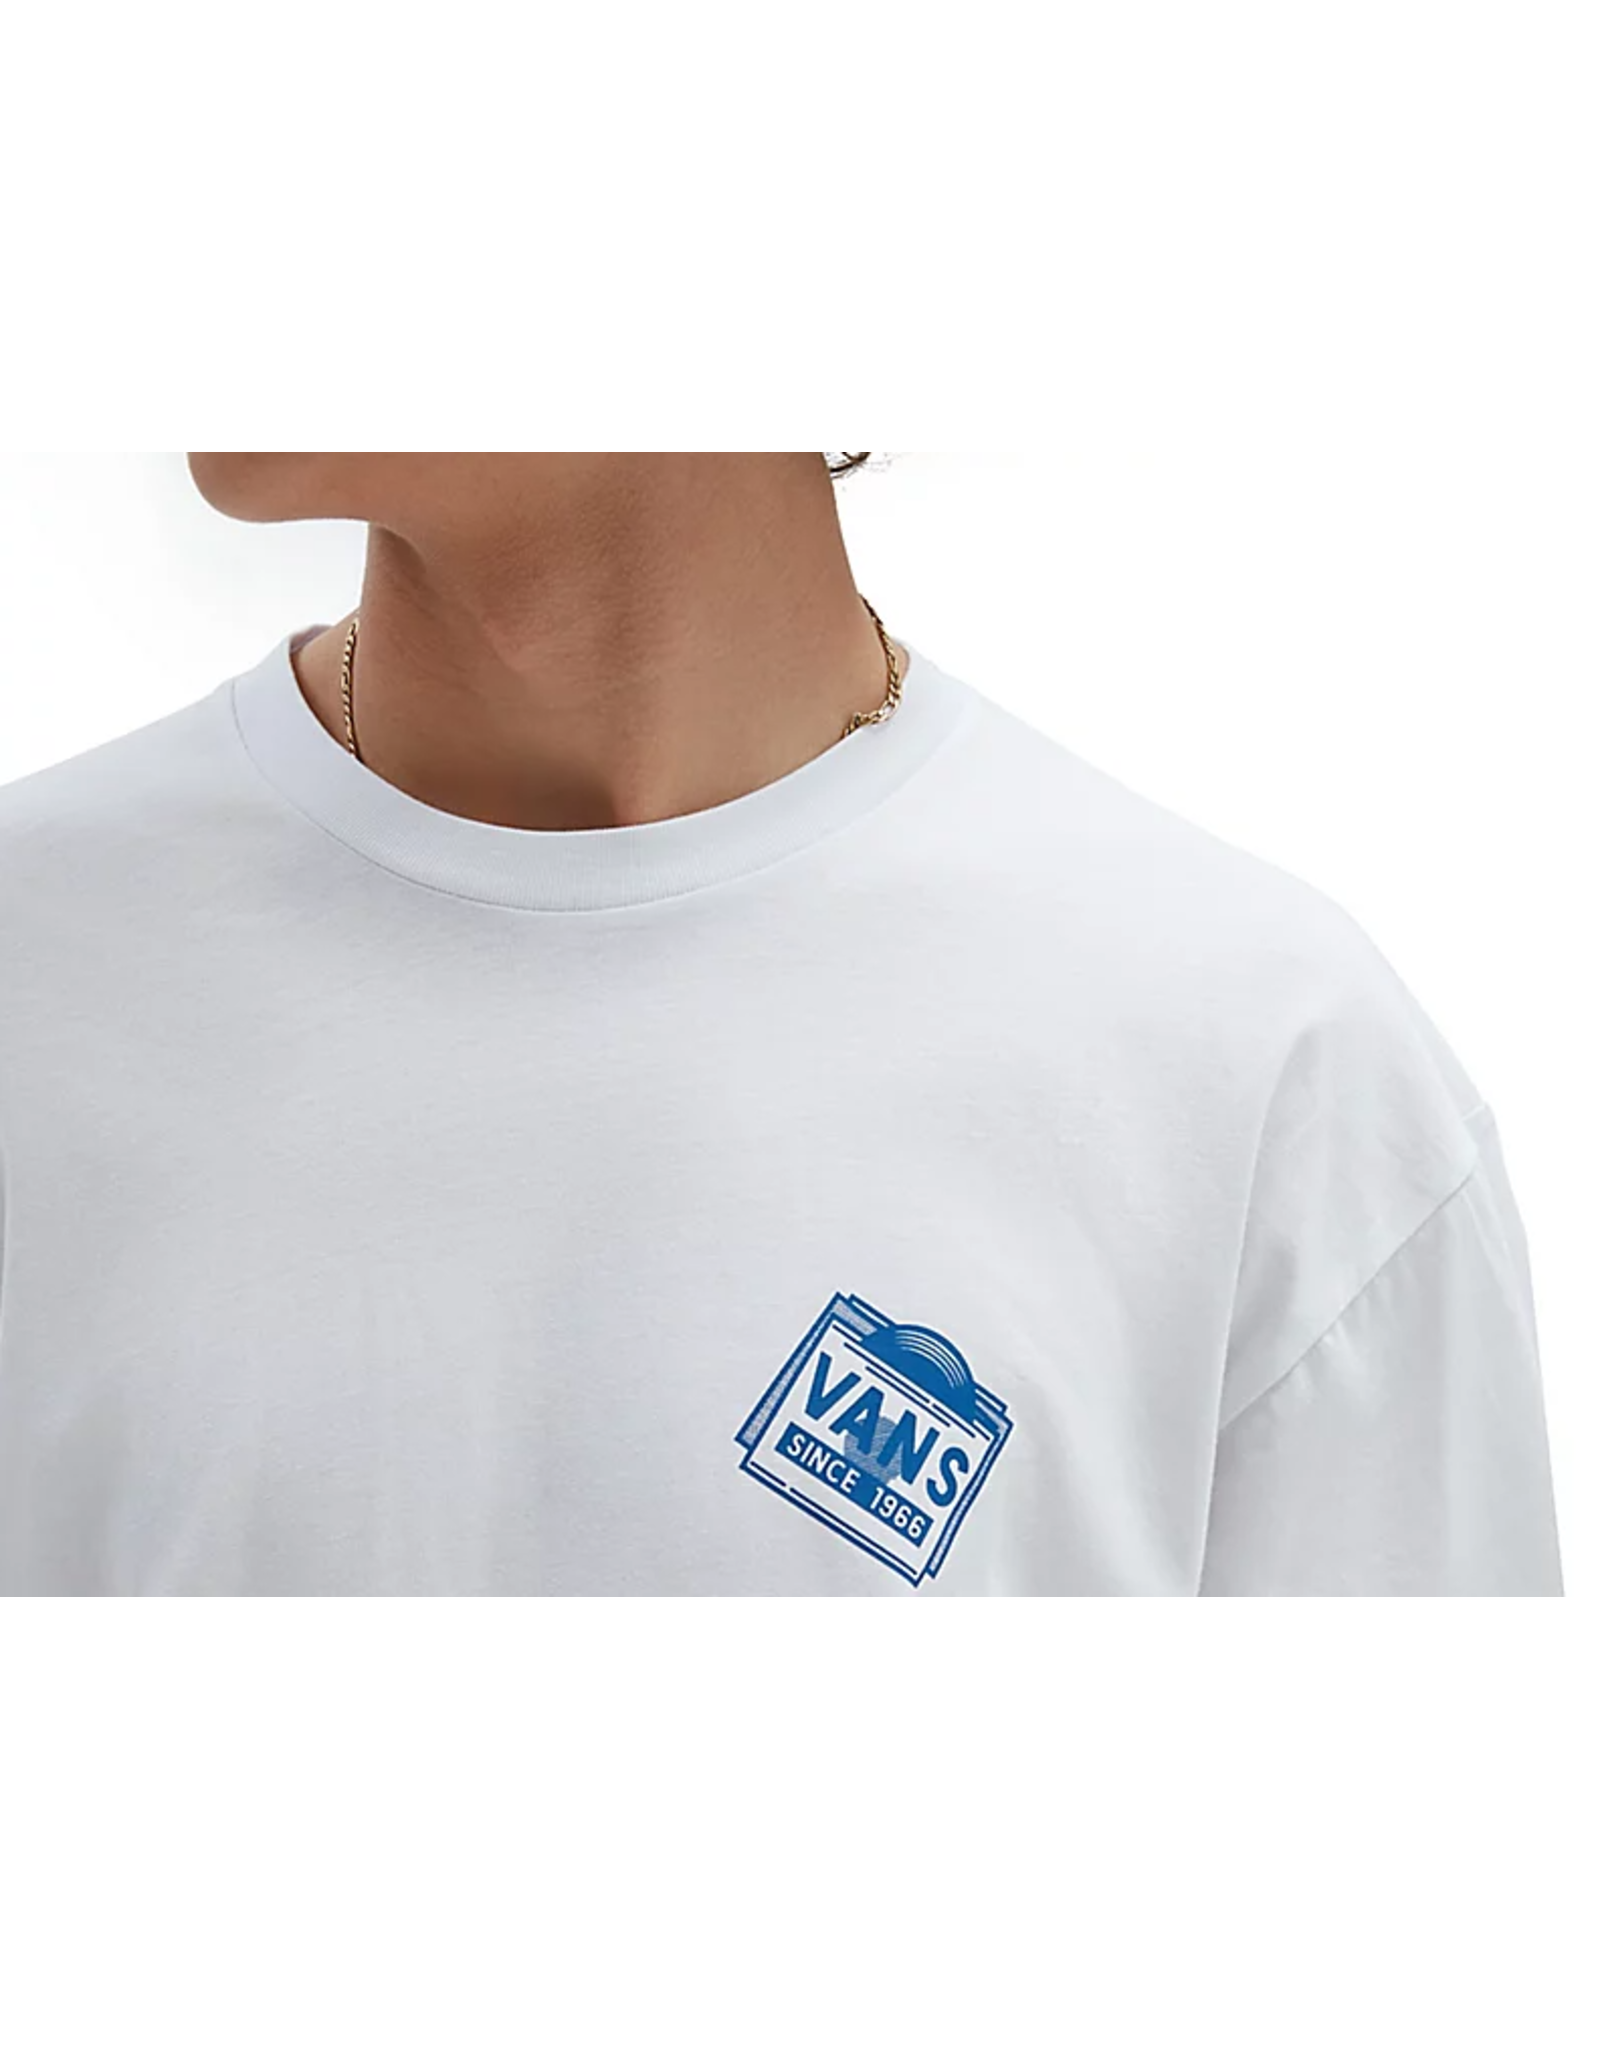 VANS RECORD LABEL SS TEE - VN0008F0WHT1